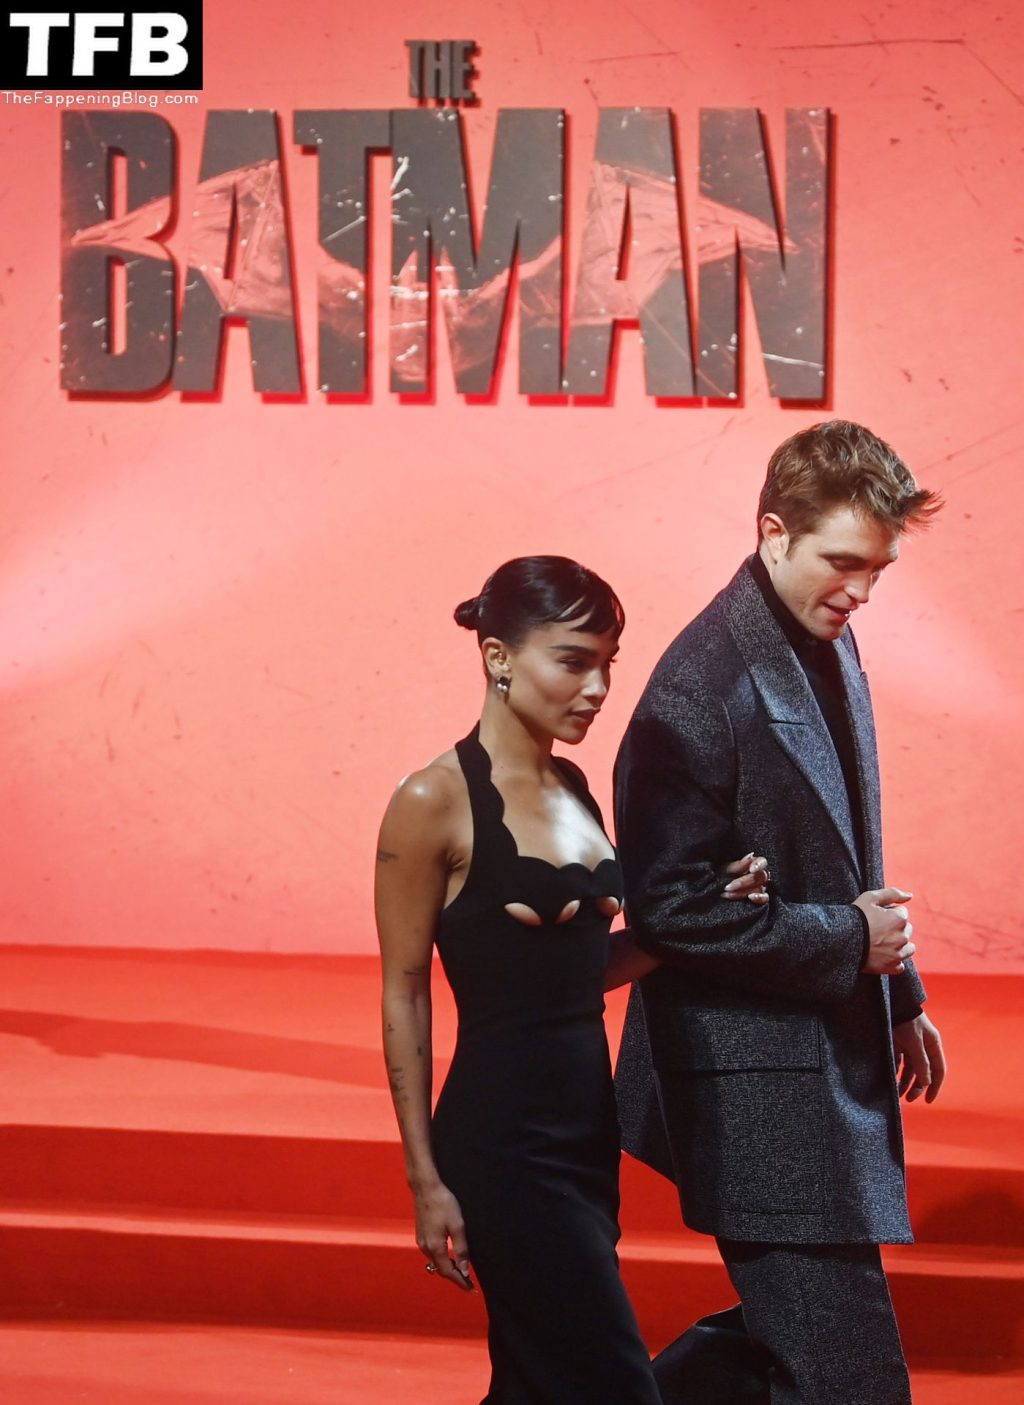 Zoe Kravitz Sexy The Fappening Blog 37 1024x1405 - Zoe Kravitz Shows Off Her Sexy Tits at ‘The Batman’ Movie Premiere in London (38 Photos)